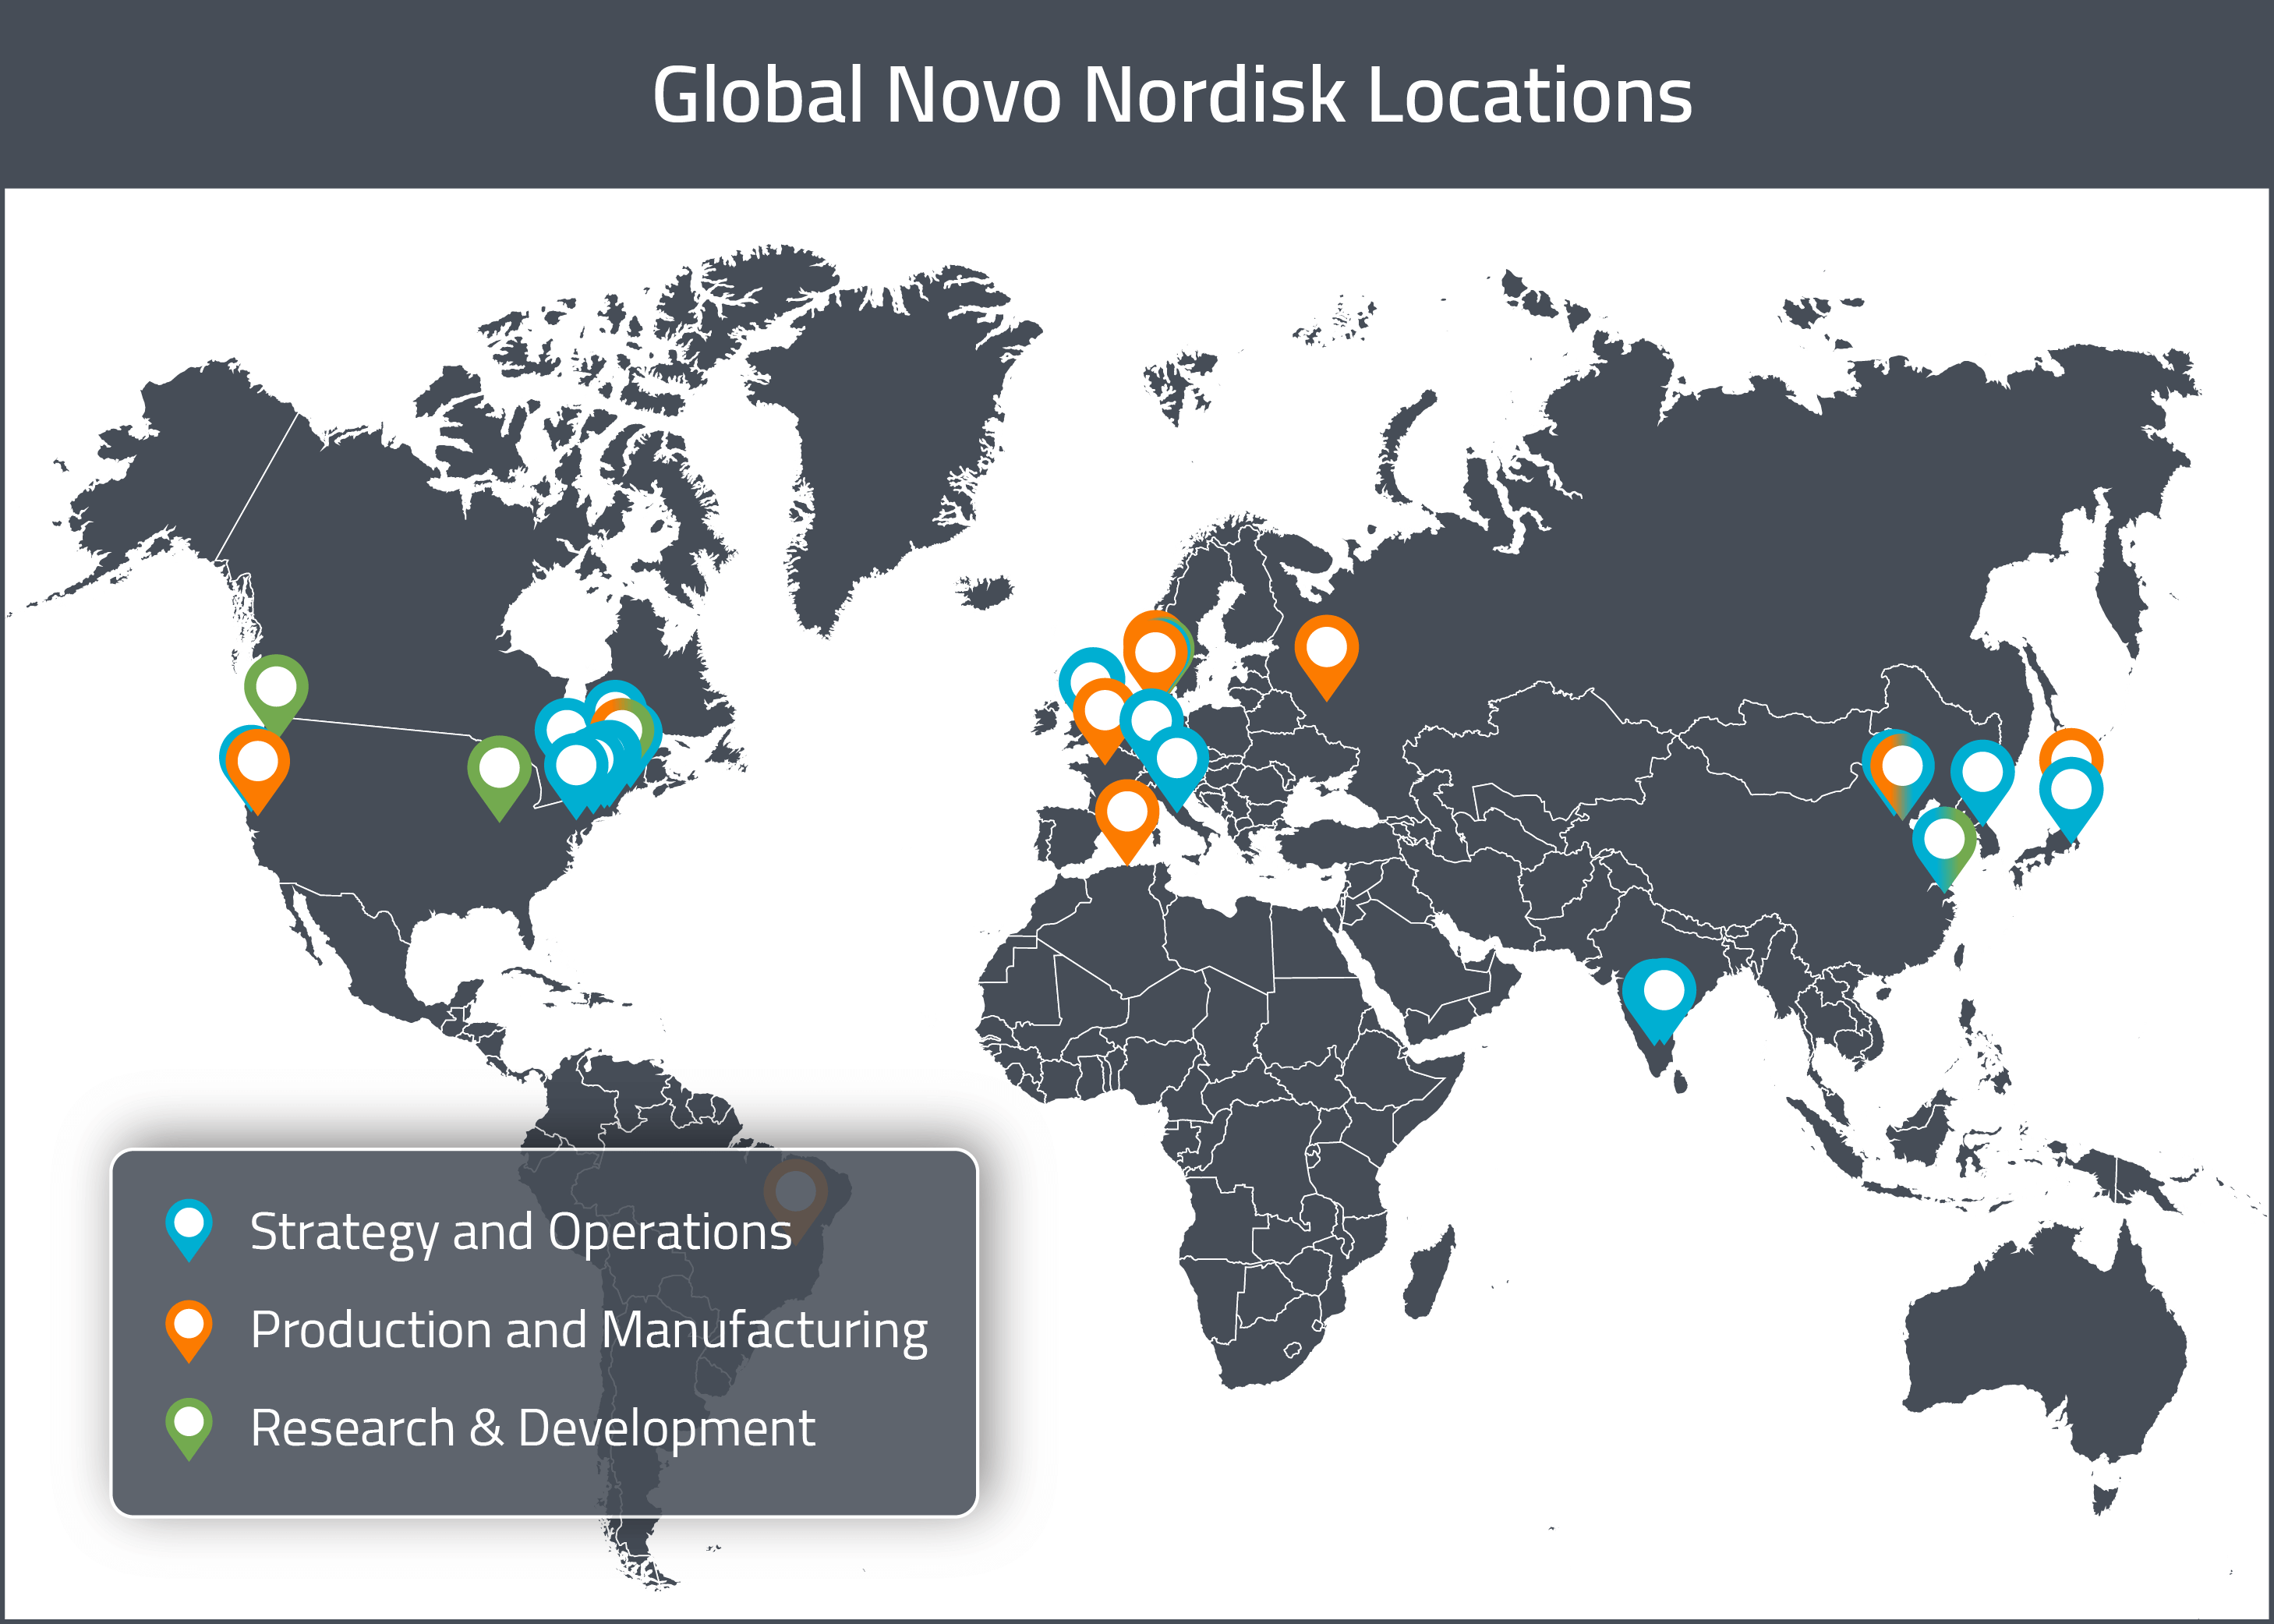 A map of Novo Nordisk's Global Drug Development and Manufacturing locations